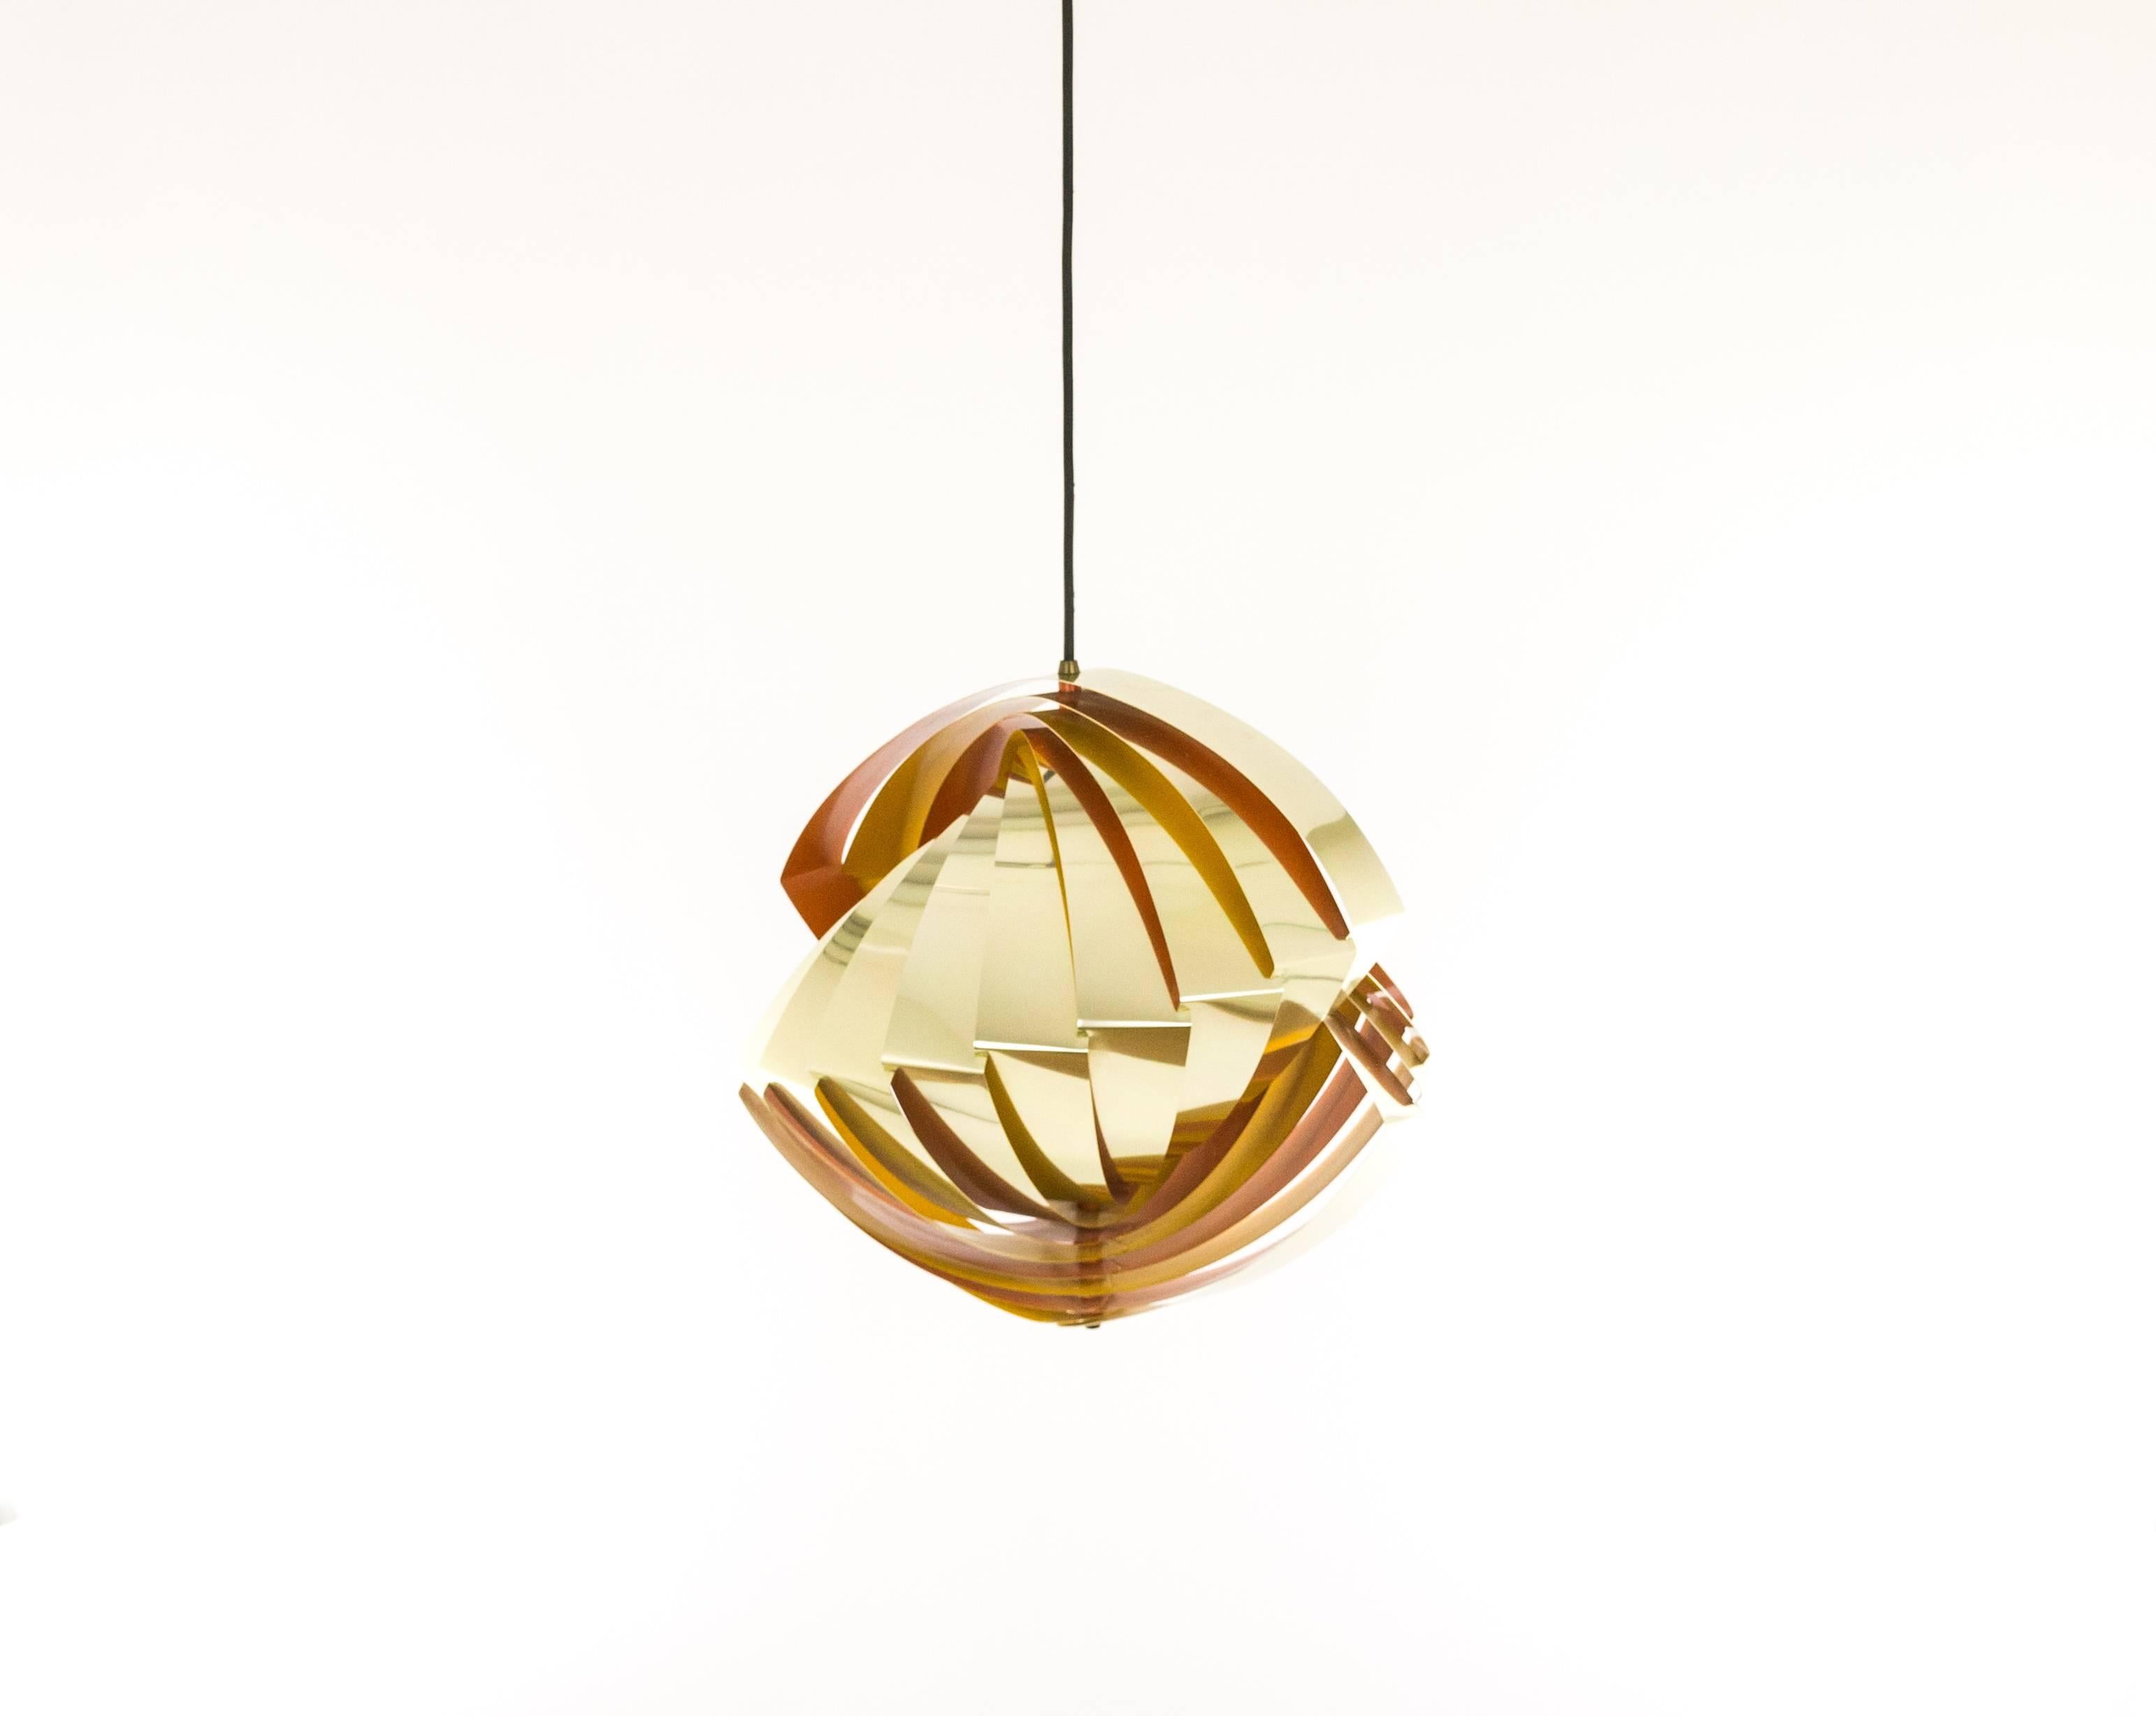 Louis Weisdorf, the renowned Danish architect and designer, created this Konkylie in pendant in 1963. It was produced by lighting manufacturer Lyfa as from 1964.

Konkylie consists of 12 thin metal slats that, elegantly bent, form a conch-like